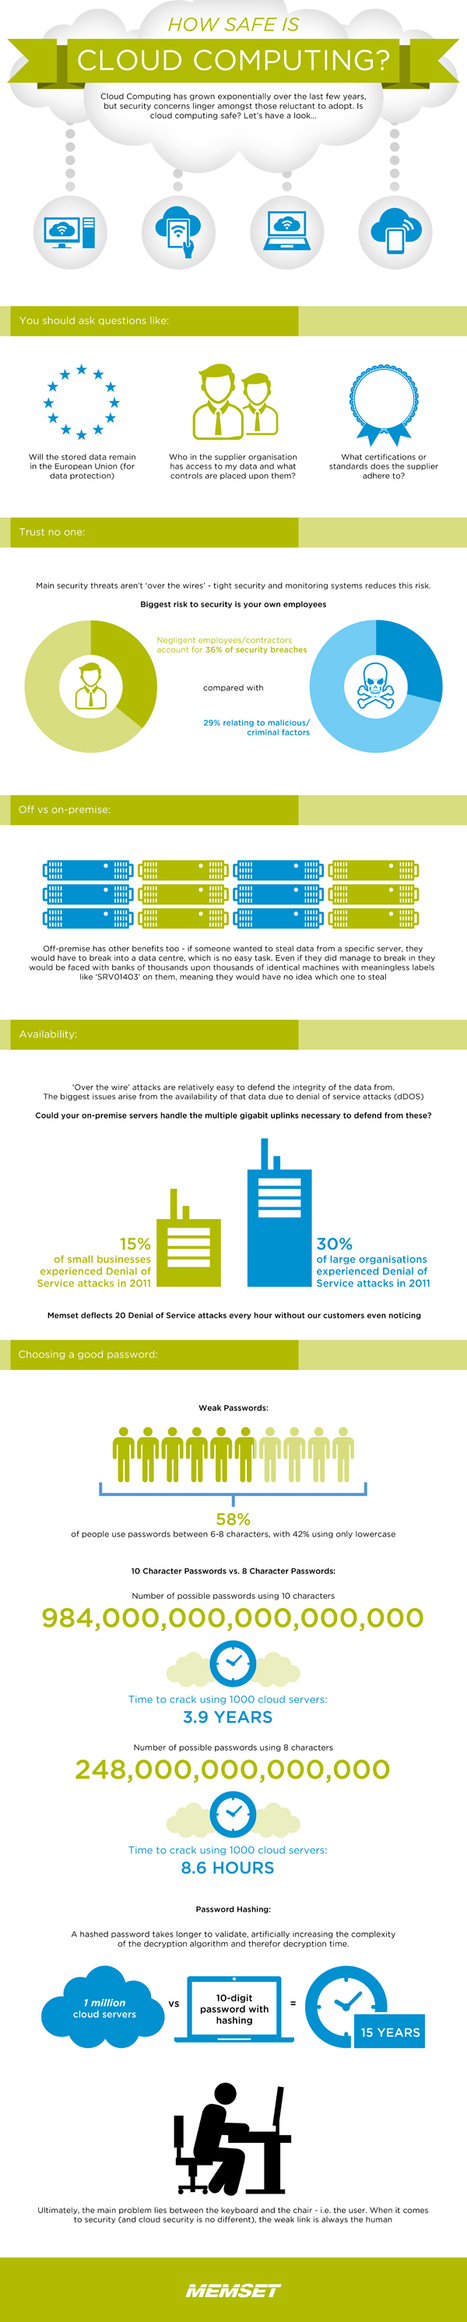 INFOGRAPHIC: How Safe is The Cloud? | Social Media Resources & e-learning | Scoop.it